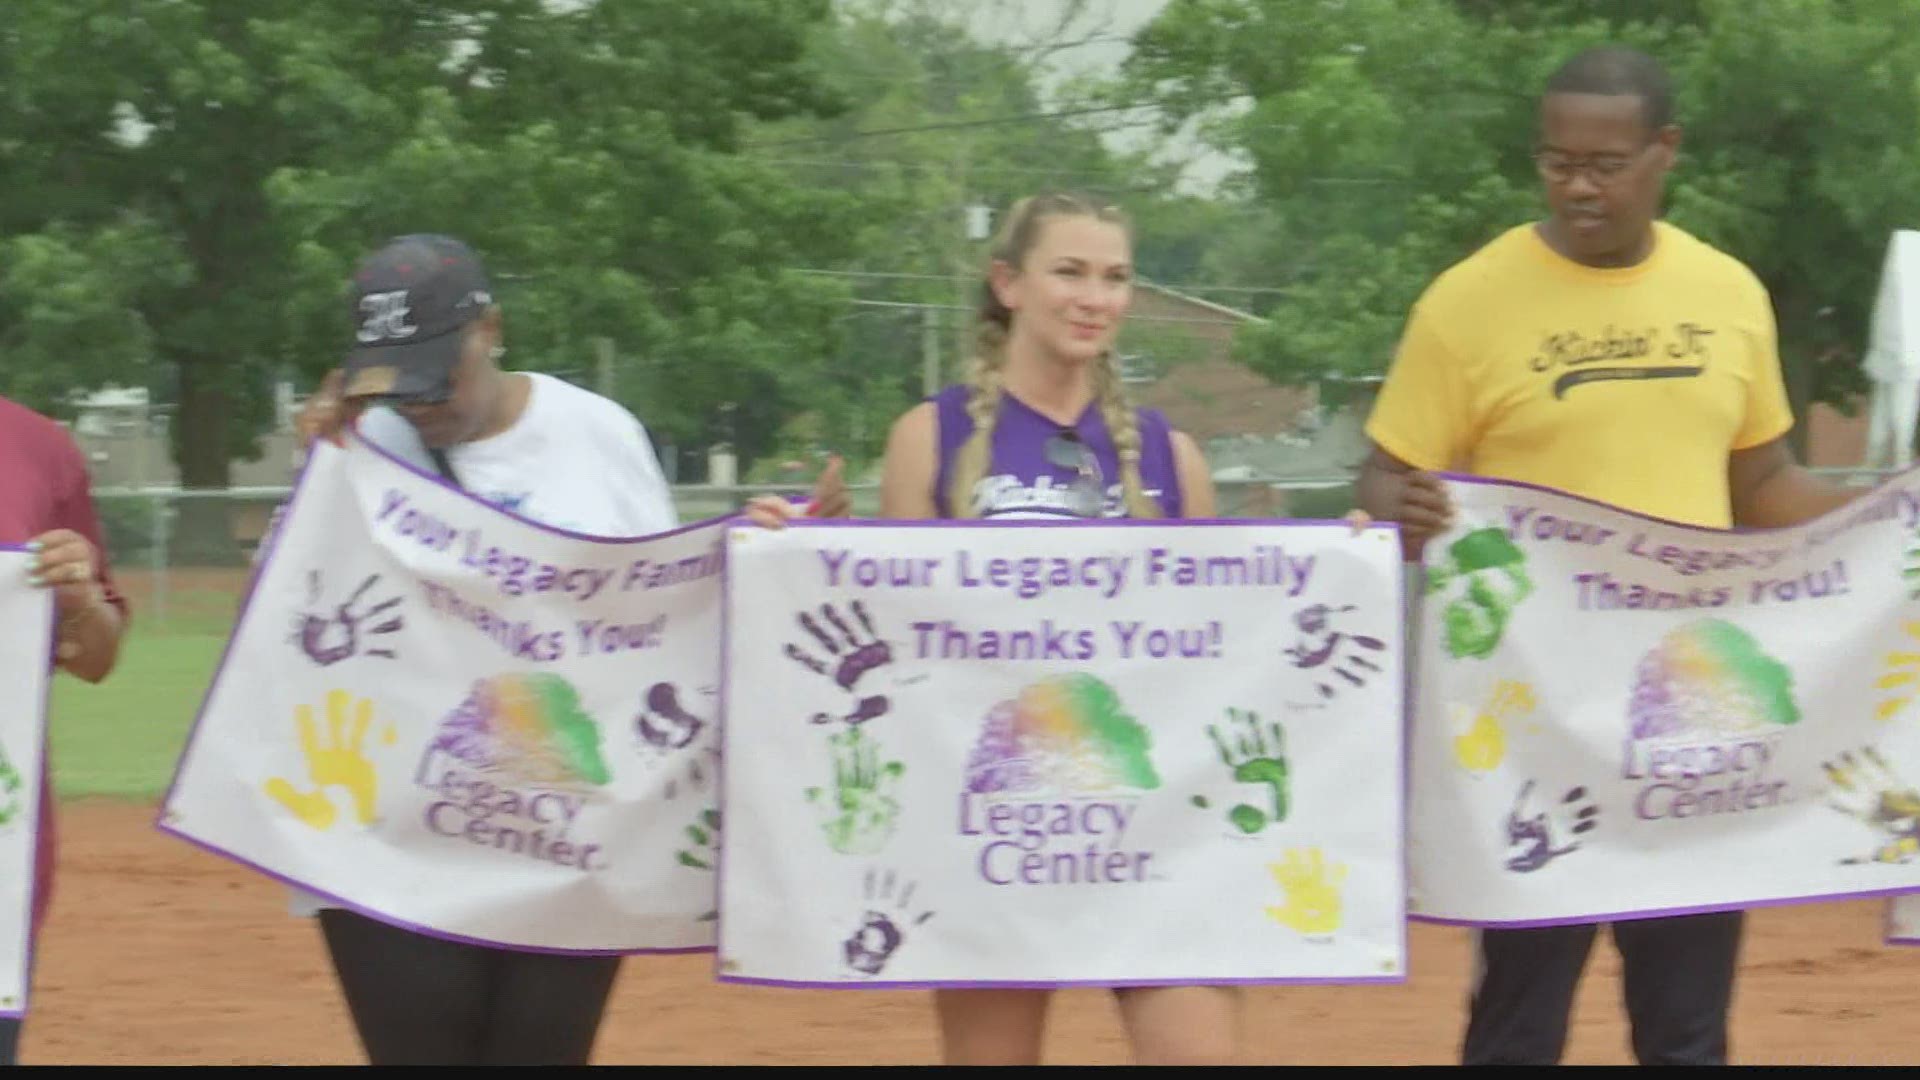 The Legacy Center raised over $300,000 in their annual kickball tournament, which was cancelled last year due to Covid-19.